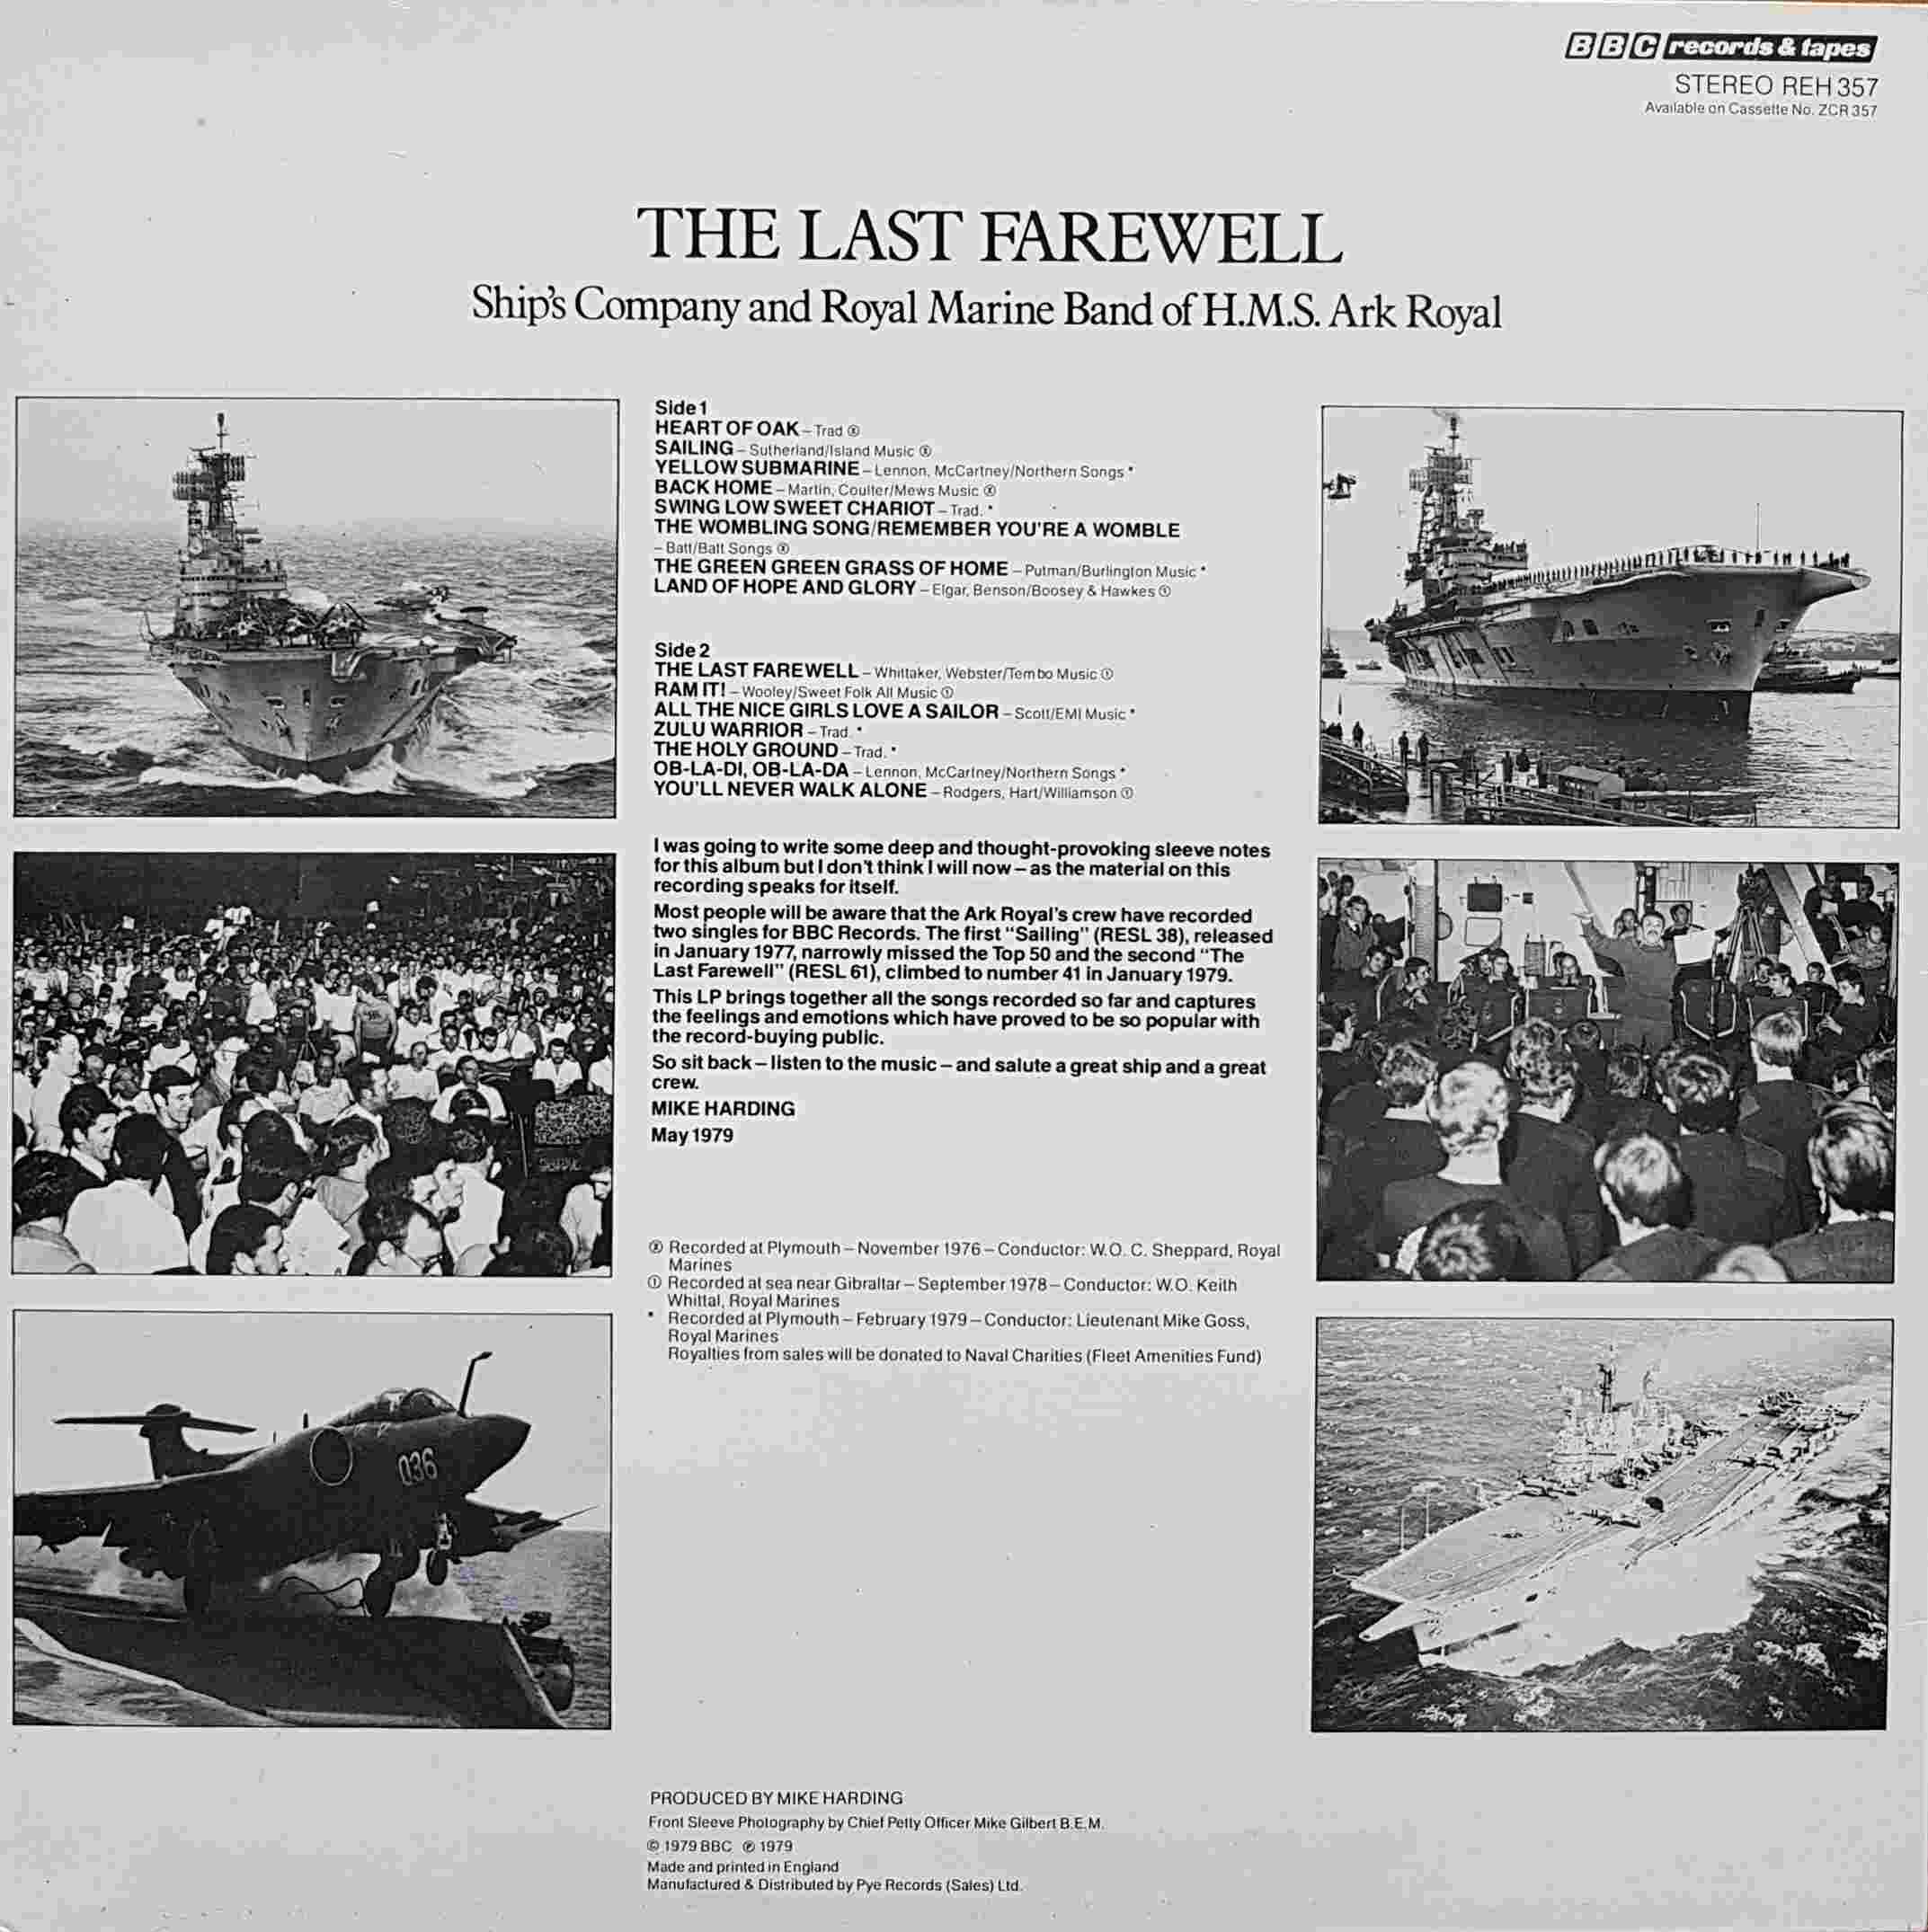 Picture of REH 357 The last farewell by artist Various / Ship's Company and Royal Marine Band of H. M. S. Ark Royal from the BBC records and Tapes library